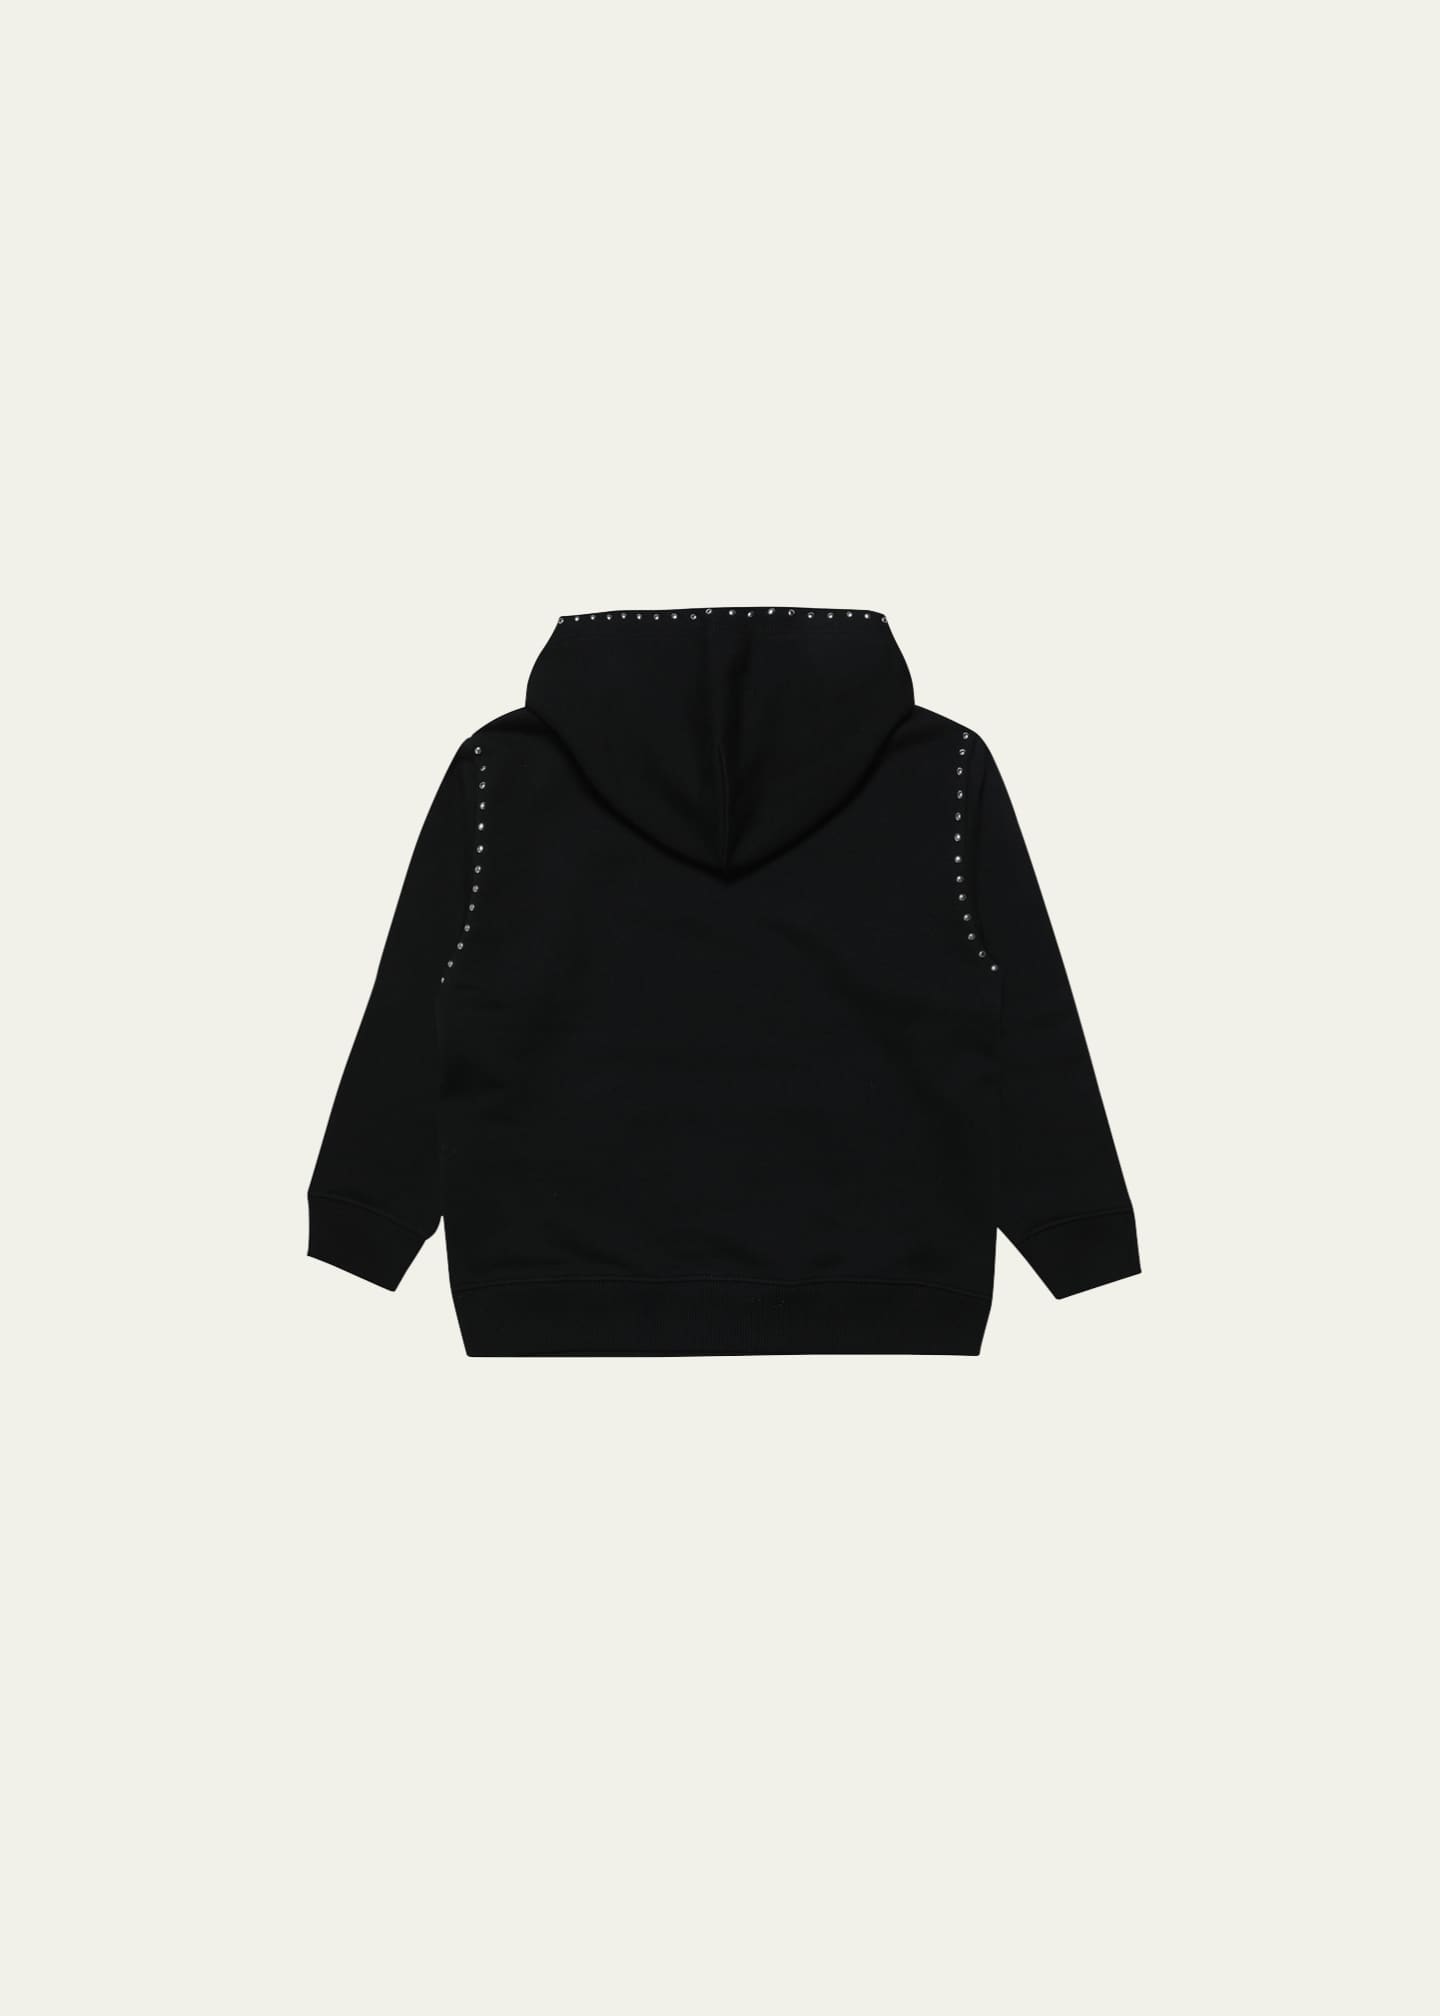 MM6 Maison Margiela Kid's Studded Trim Pullover Hoodie, Size 6-16